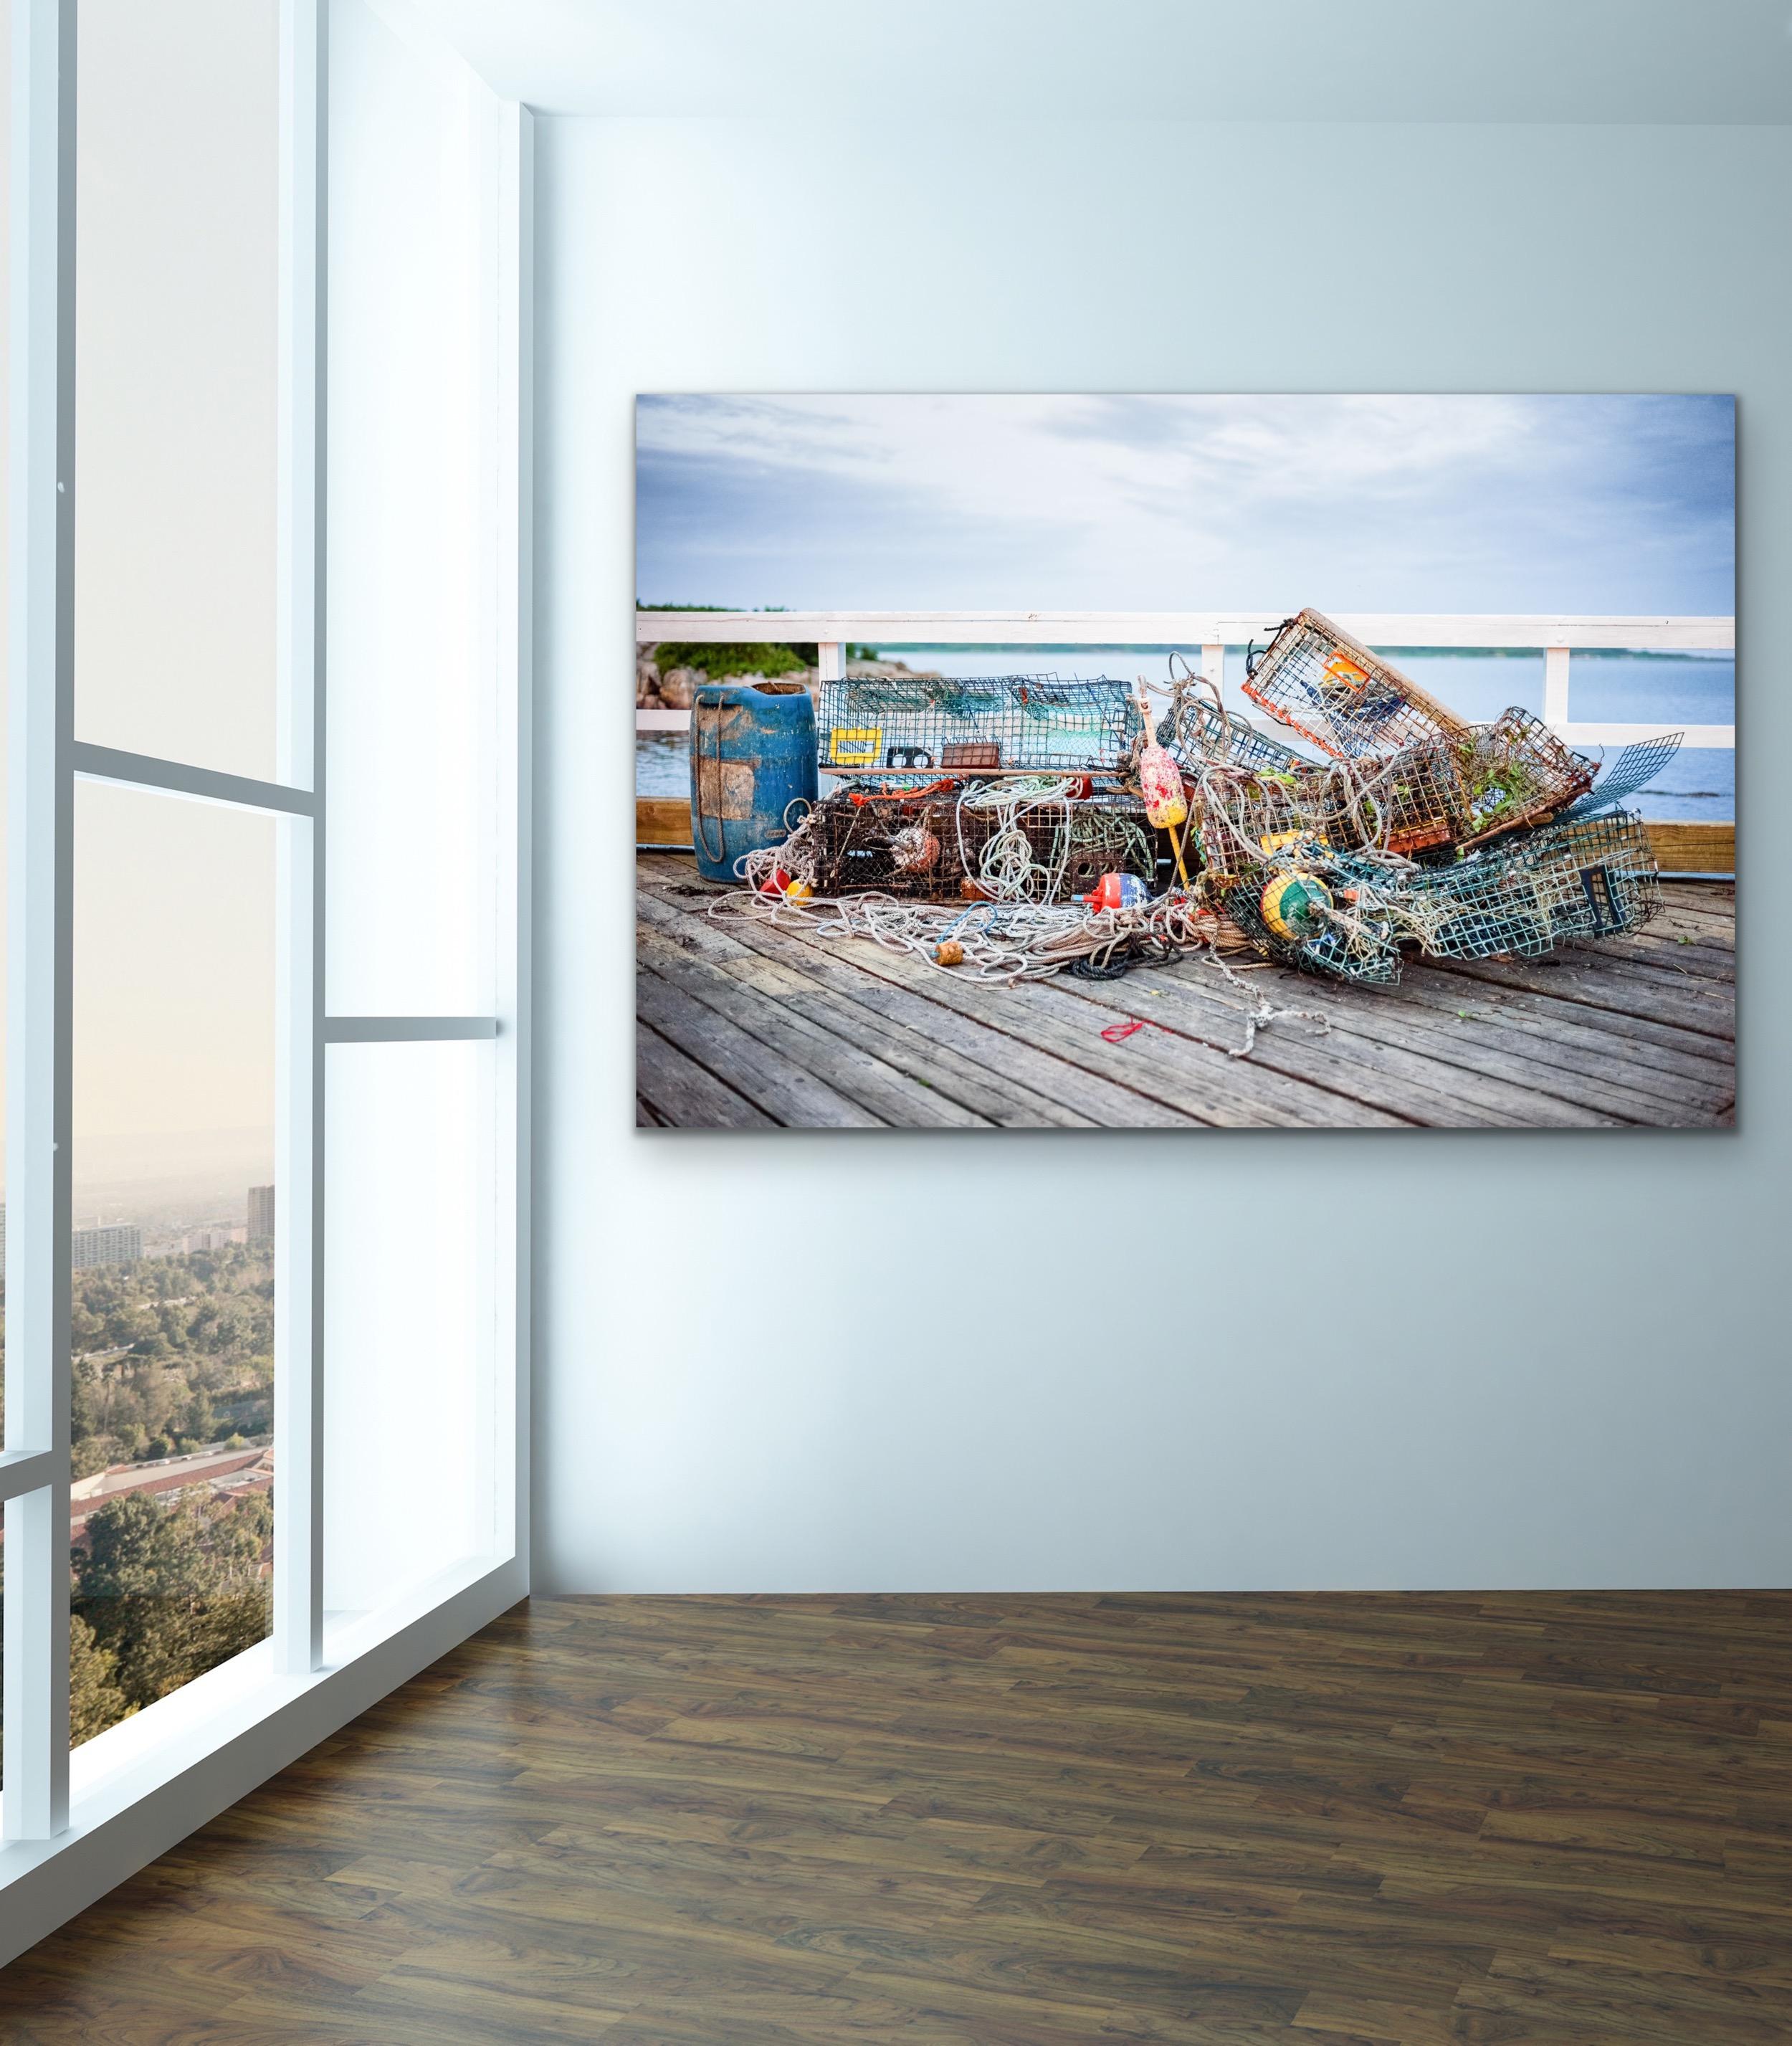 This contemporary coastal photograph by Peter Mendelson pictures colorful lobster traps and nets, stacked in a tangled pile, and sitting on a dock in front of a white railing. Through the railing, the viewer can see a coastal rock formation and the